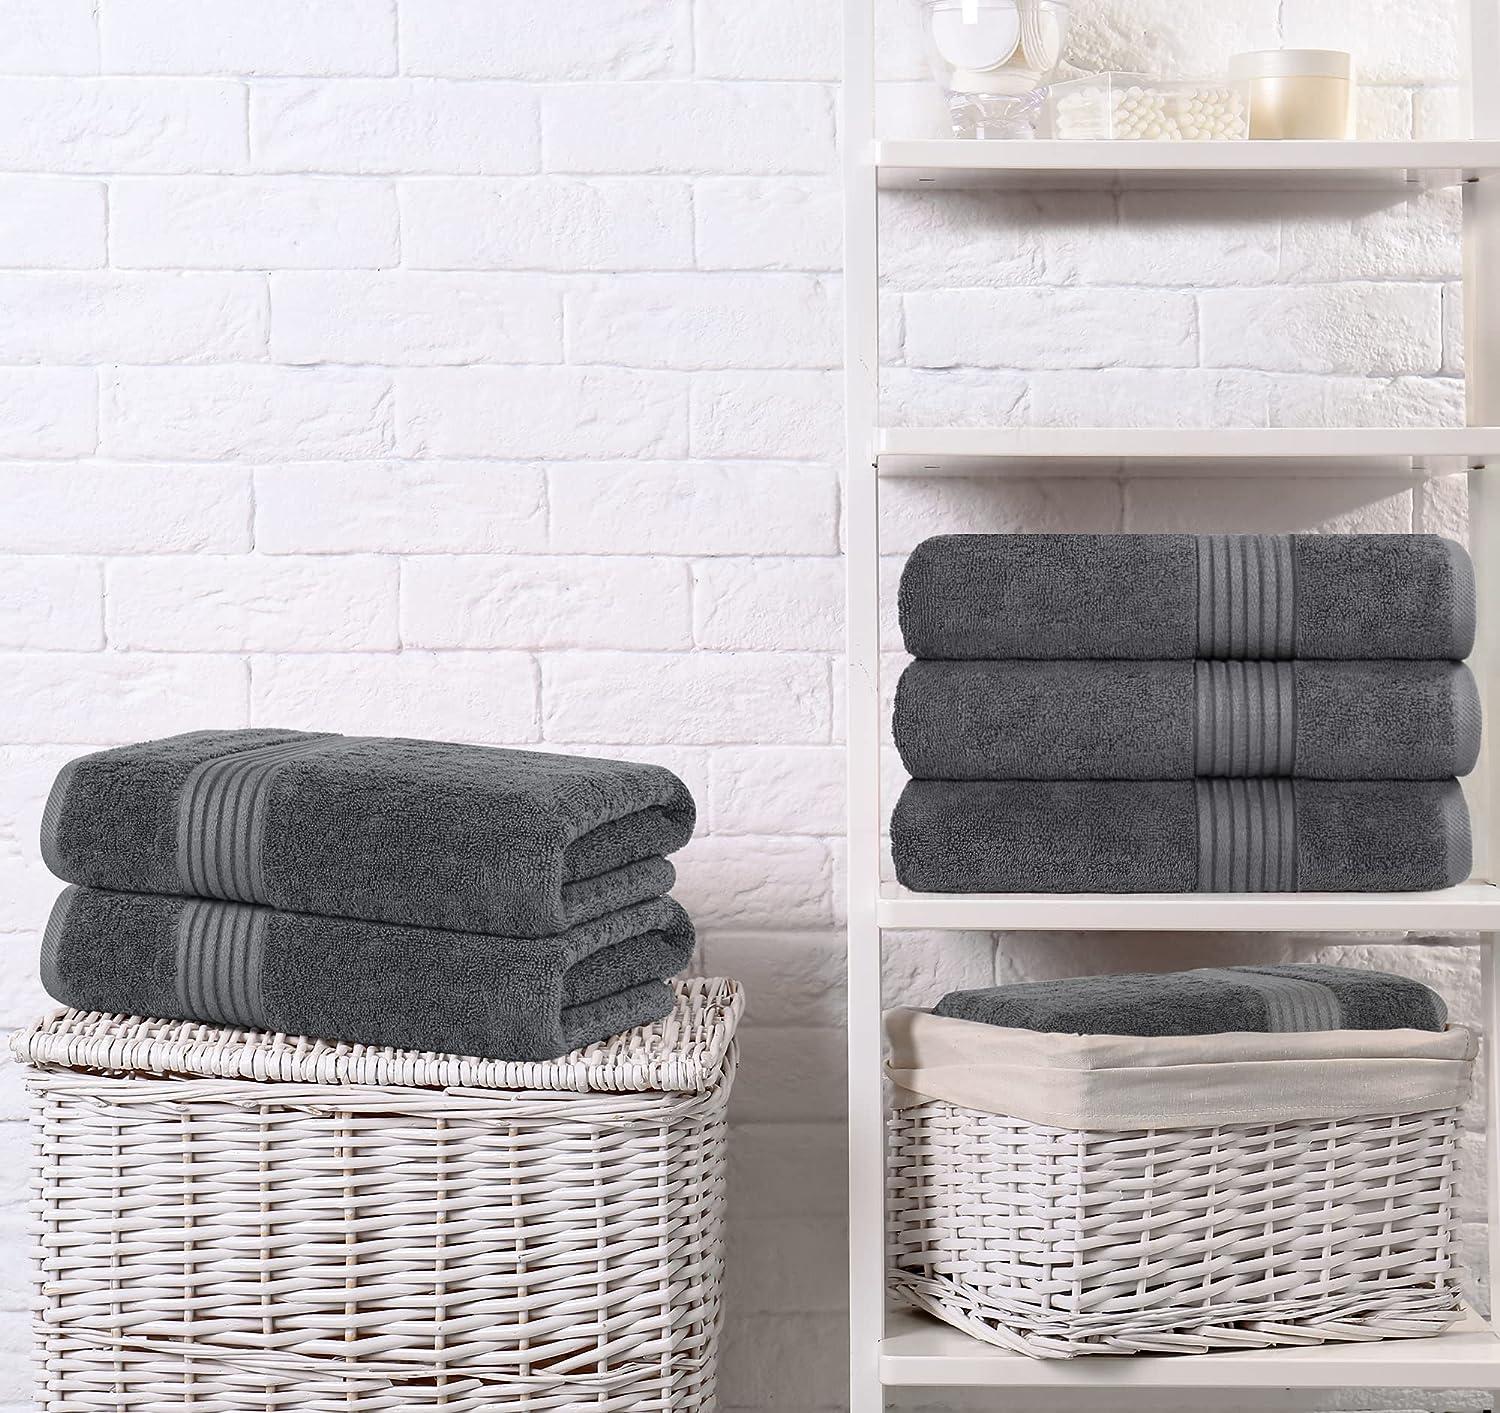 Utopia Towels 4 Pack Premium Bath Towels Set, (27 x 54 Inches) 100% Ring  Spun Cotton 600GSM, Lightweight and Highly Absorbent Quick Drying Towels,  Perfect for Daily Use (Black) 4 Piece Bath Towel Set Black